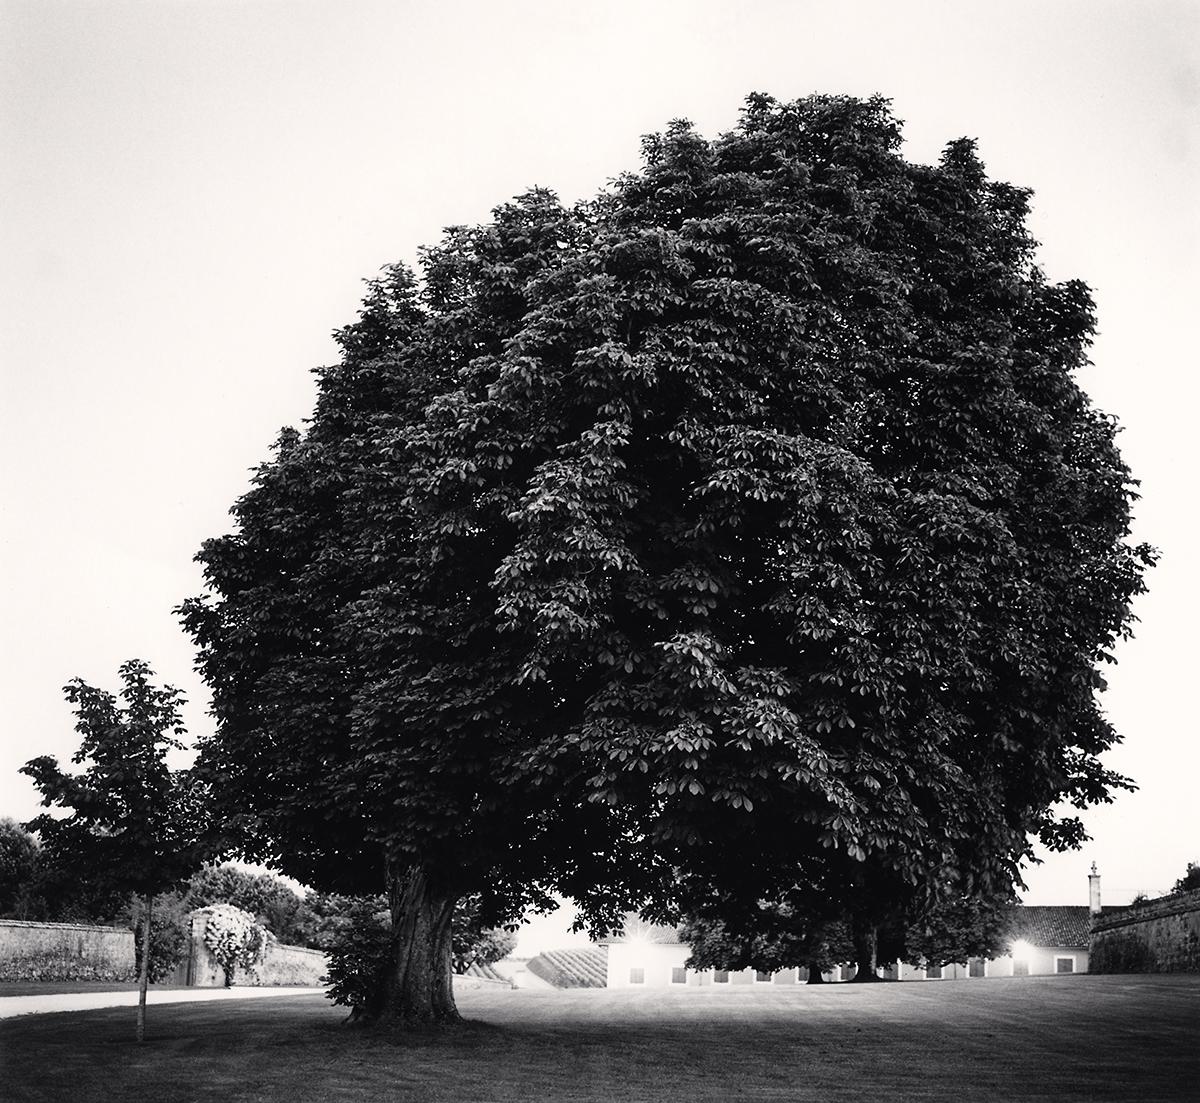 Chateau Lafite Rothschild, Study 12, Bordeaux, France by Michael Kenna presents a lush, seemingly oversized tree dominating the landscape. Structures in the background peek out from behind the foliage of the tree. The detailed leaves emphasize the